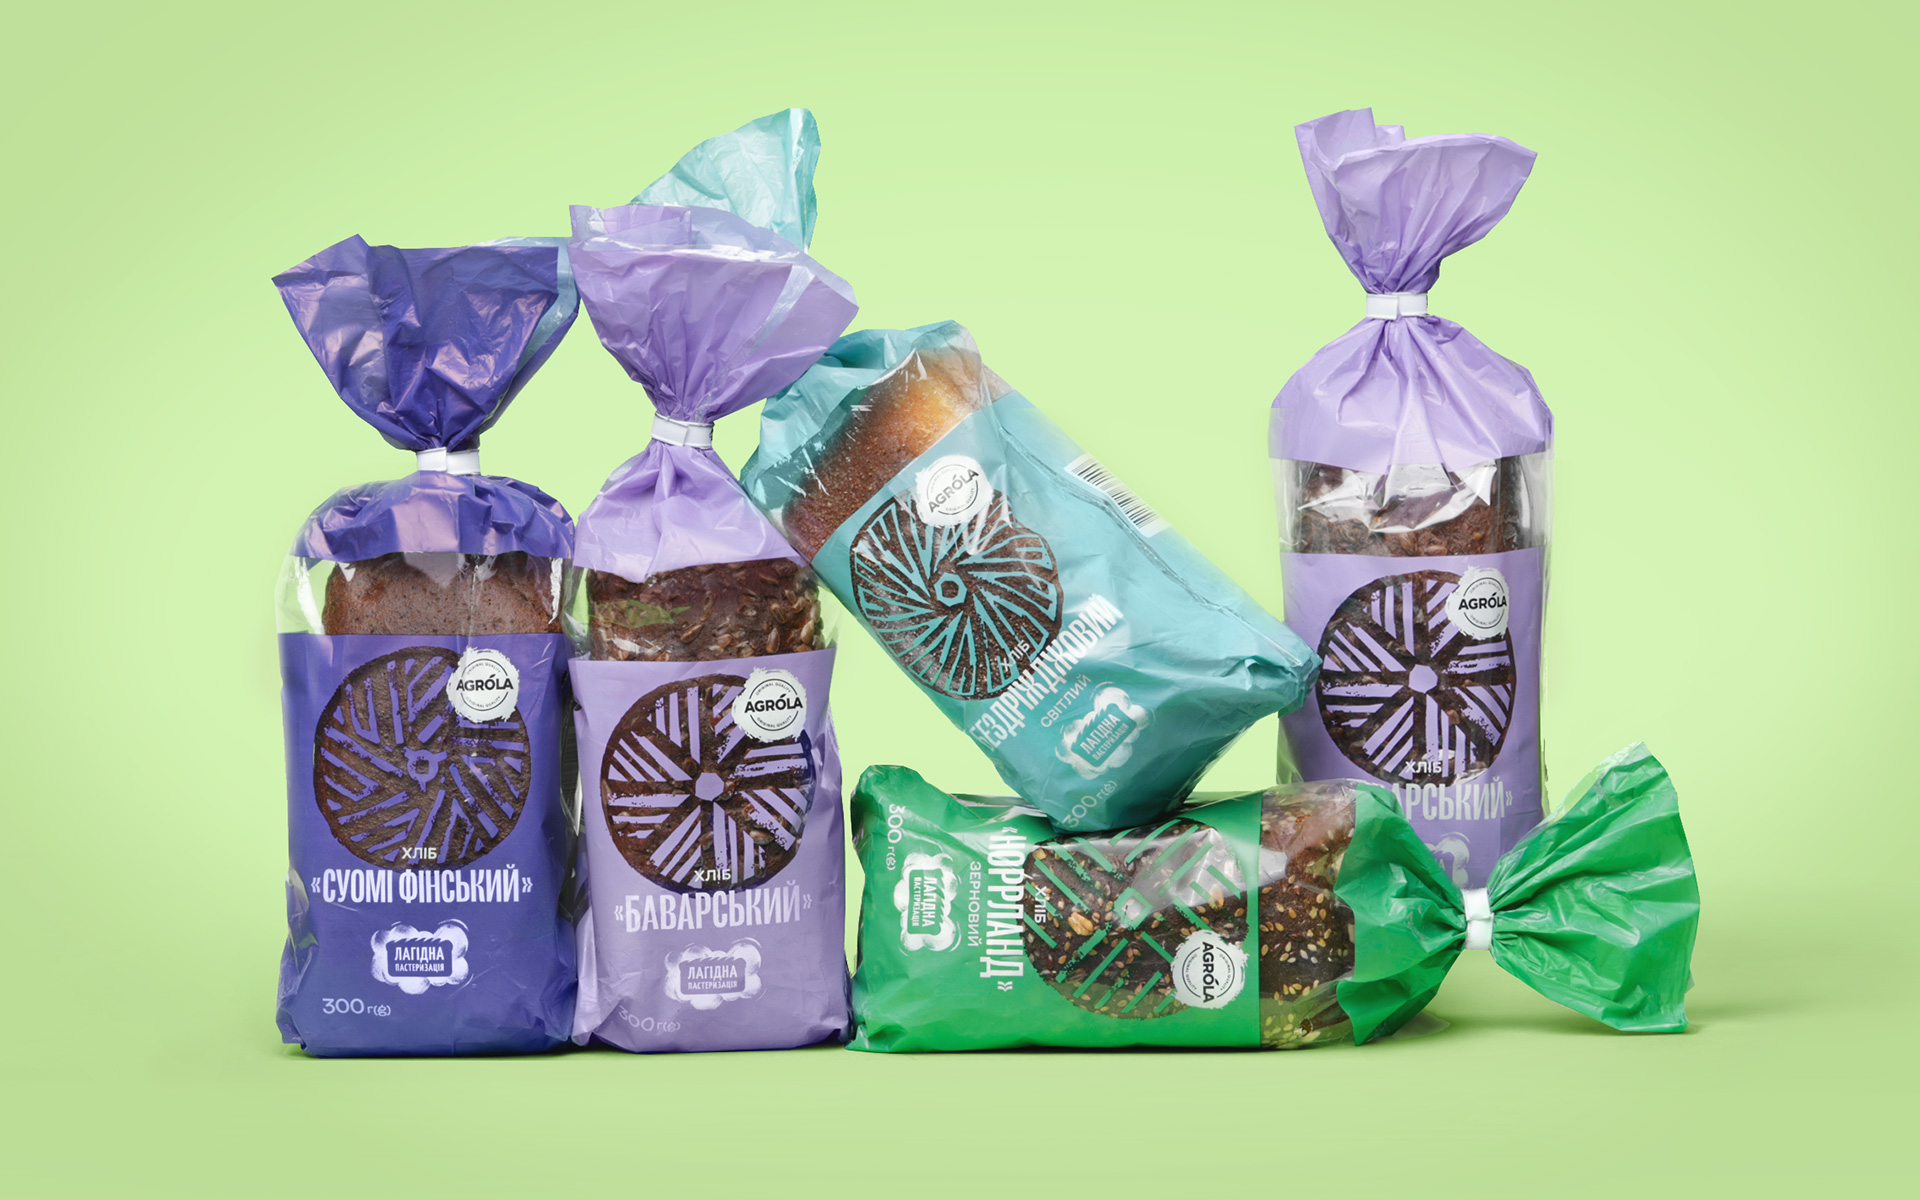 Vataga Agency Creates Unique Packaging for Agrola’s Innovative Bread Line